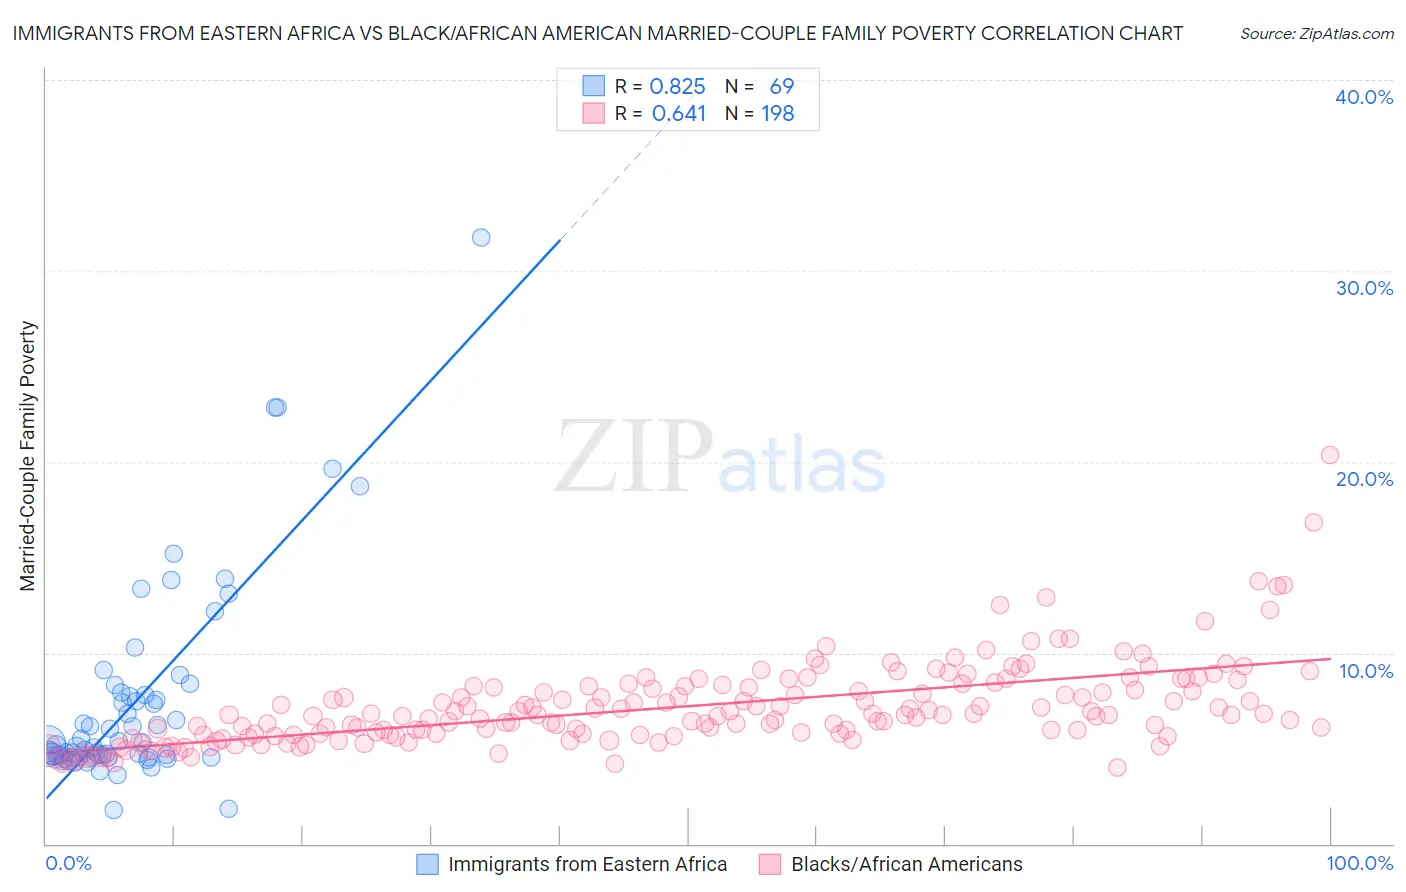 Immigrants from Eastern Africa vs Black/African American Married-Couple Family Poverty